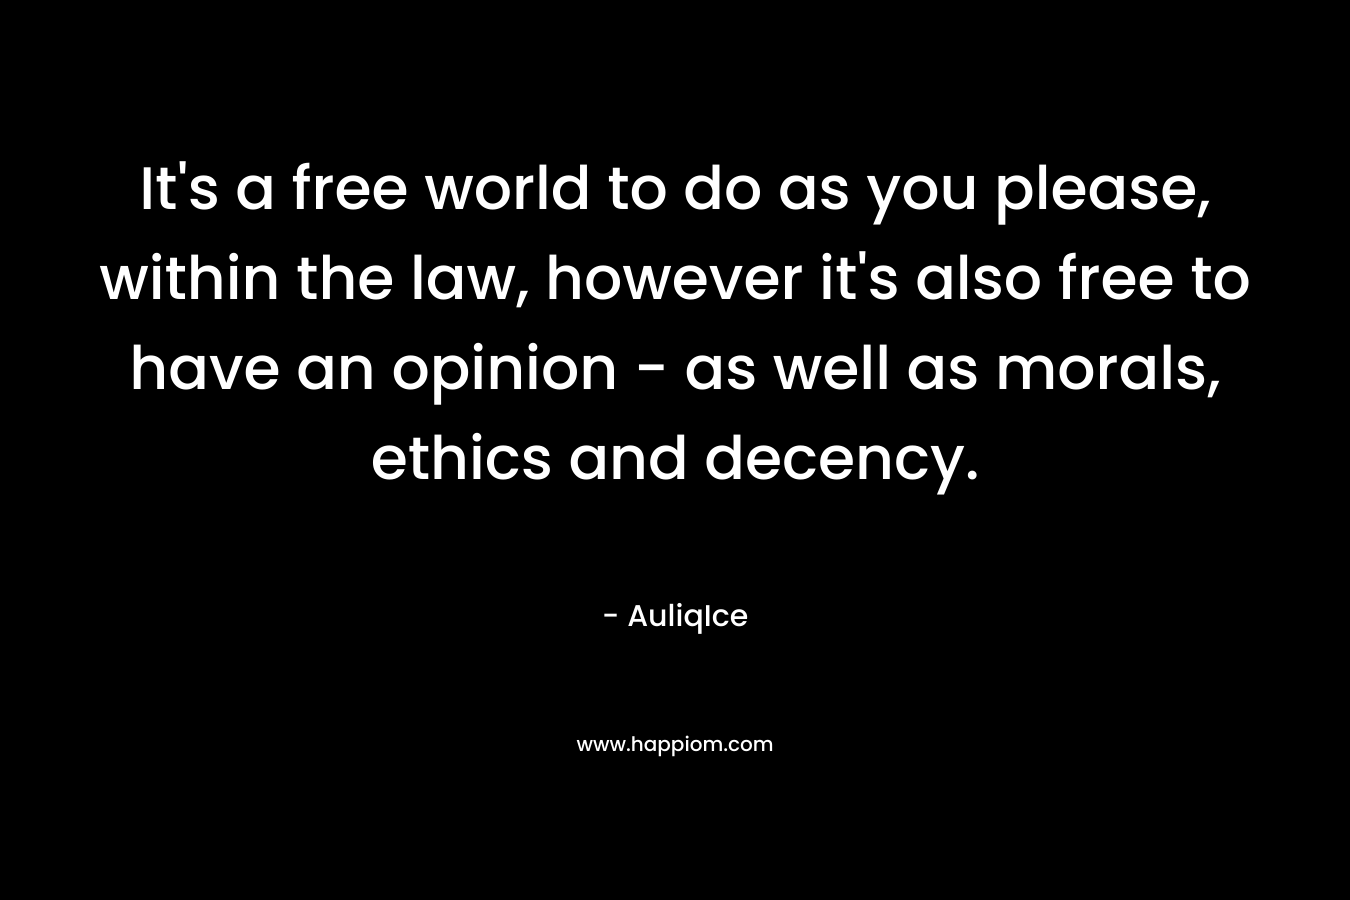 It's a free world to do as you please, within the law, however it's also free to have an opinion - as well as morals, ethics and decency.